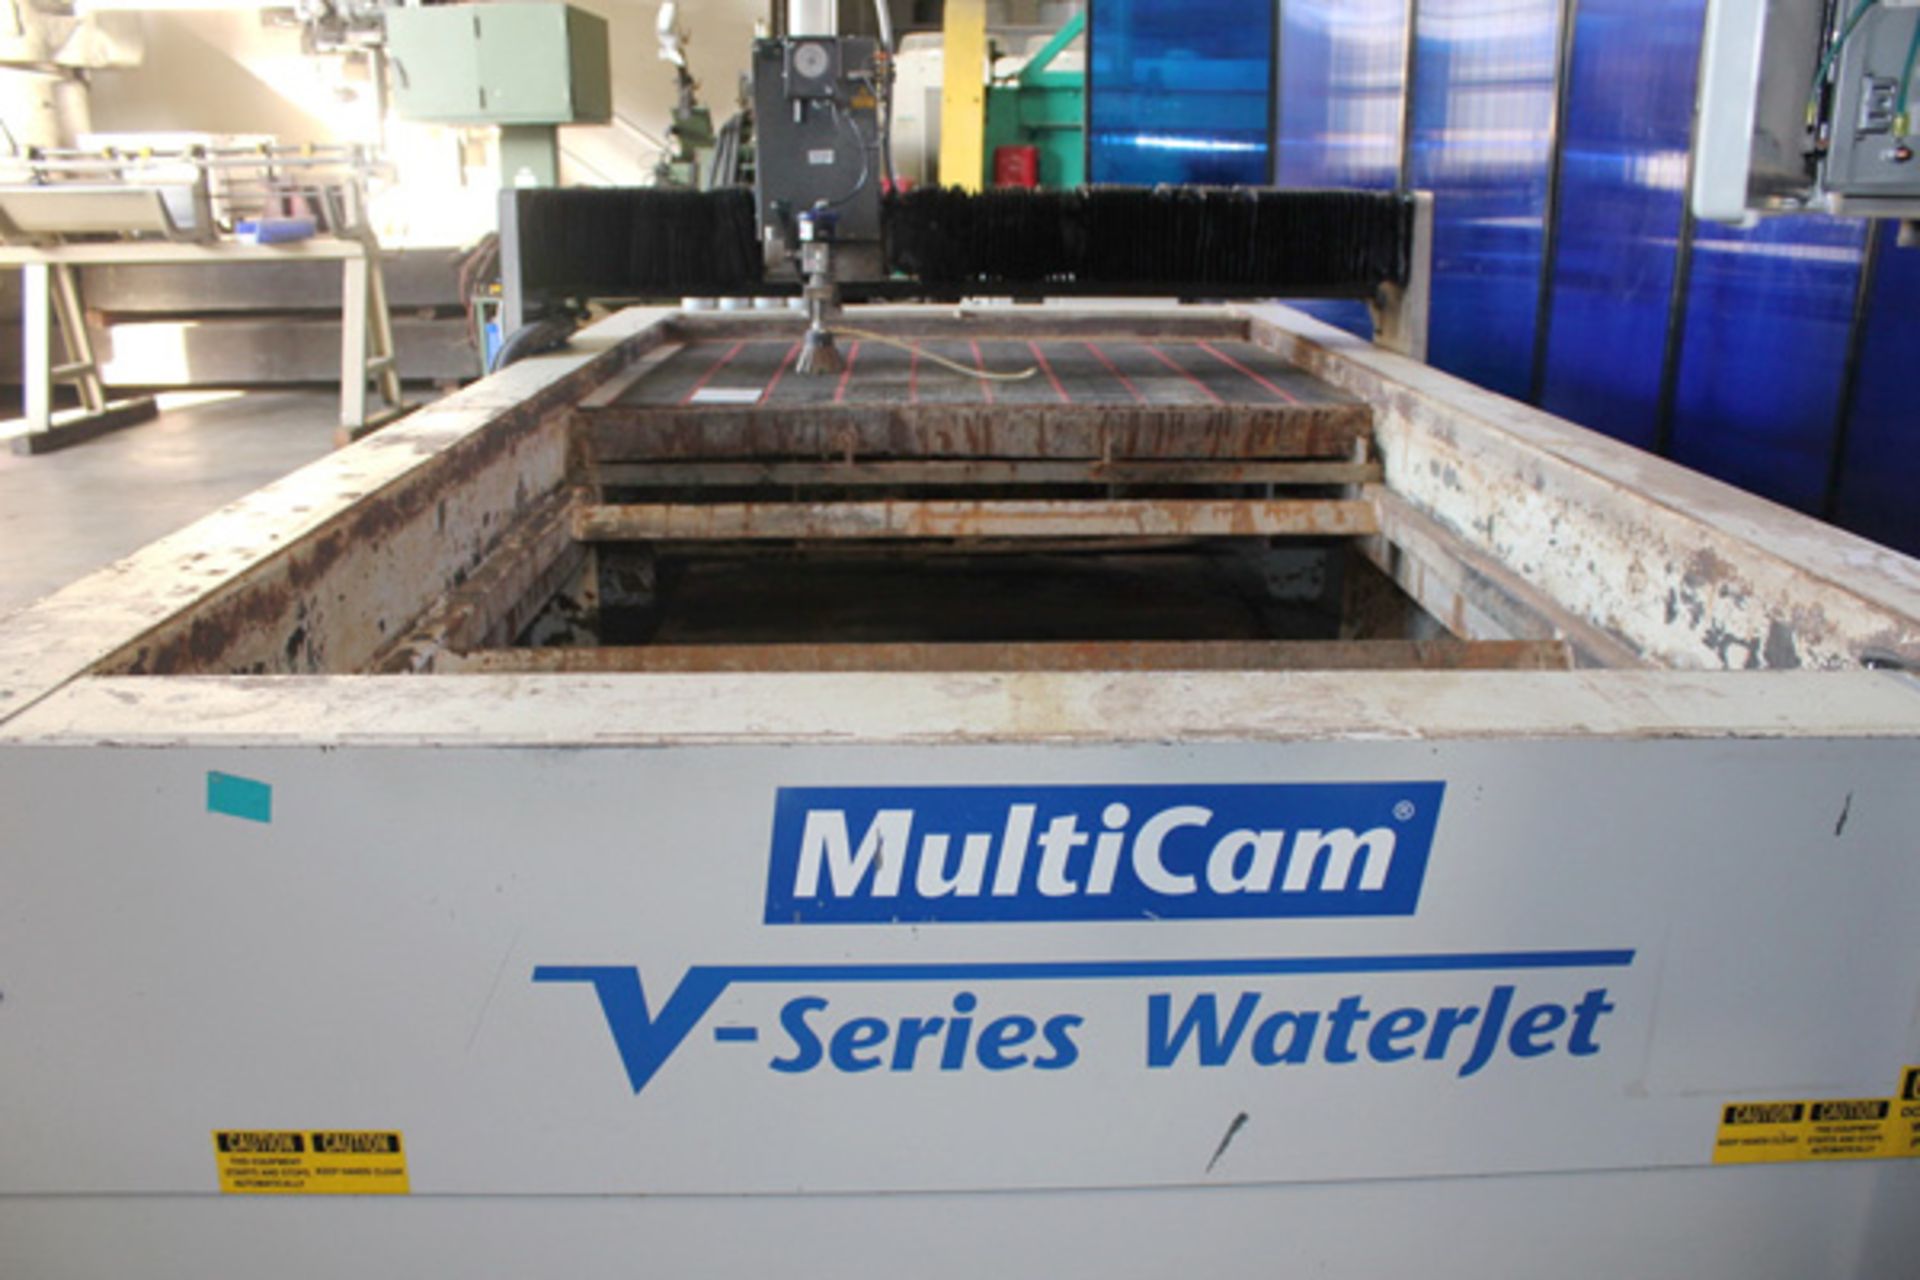 2013 Multicam CNC Water Jet | 120" x 60" x 3.5", Mdl: V-204, S/N: V-204-W09724 - 8446HP - Image 4 of 23